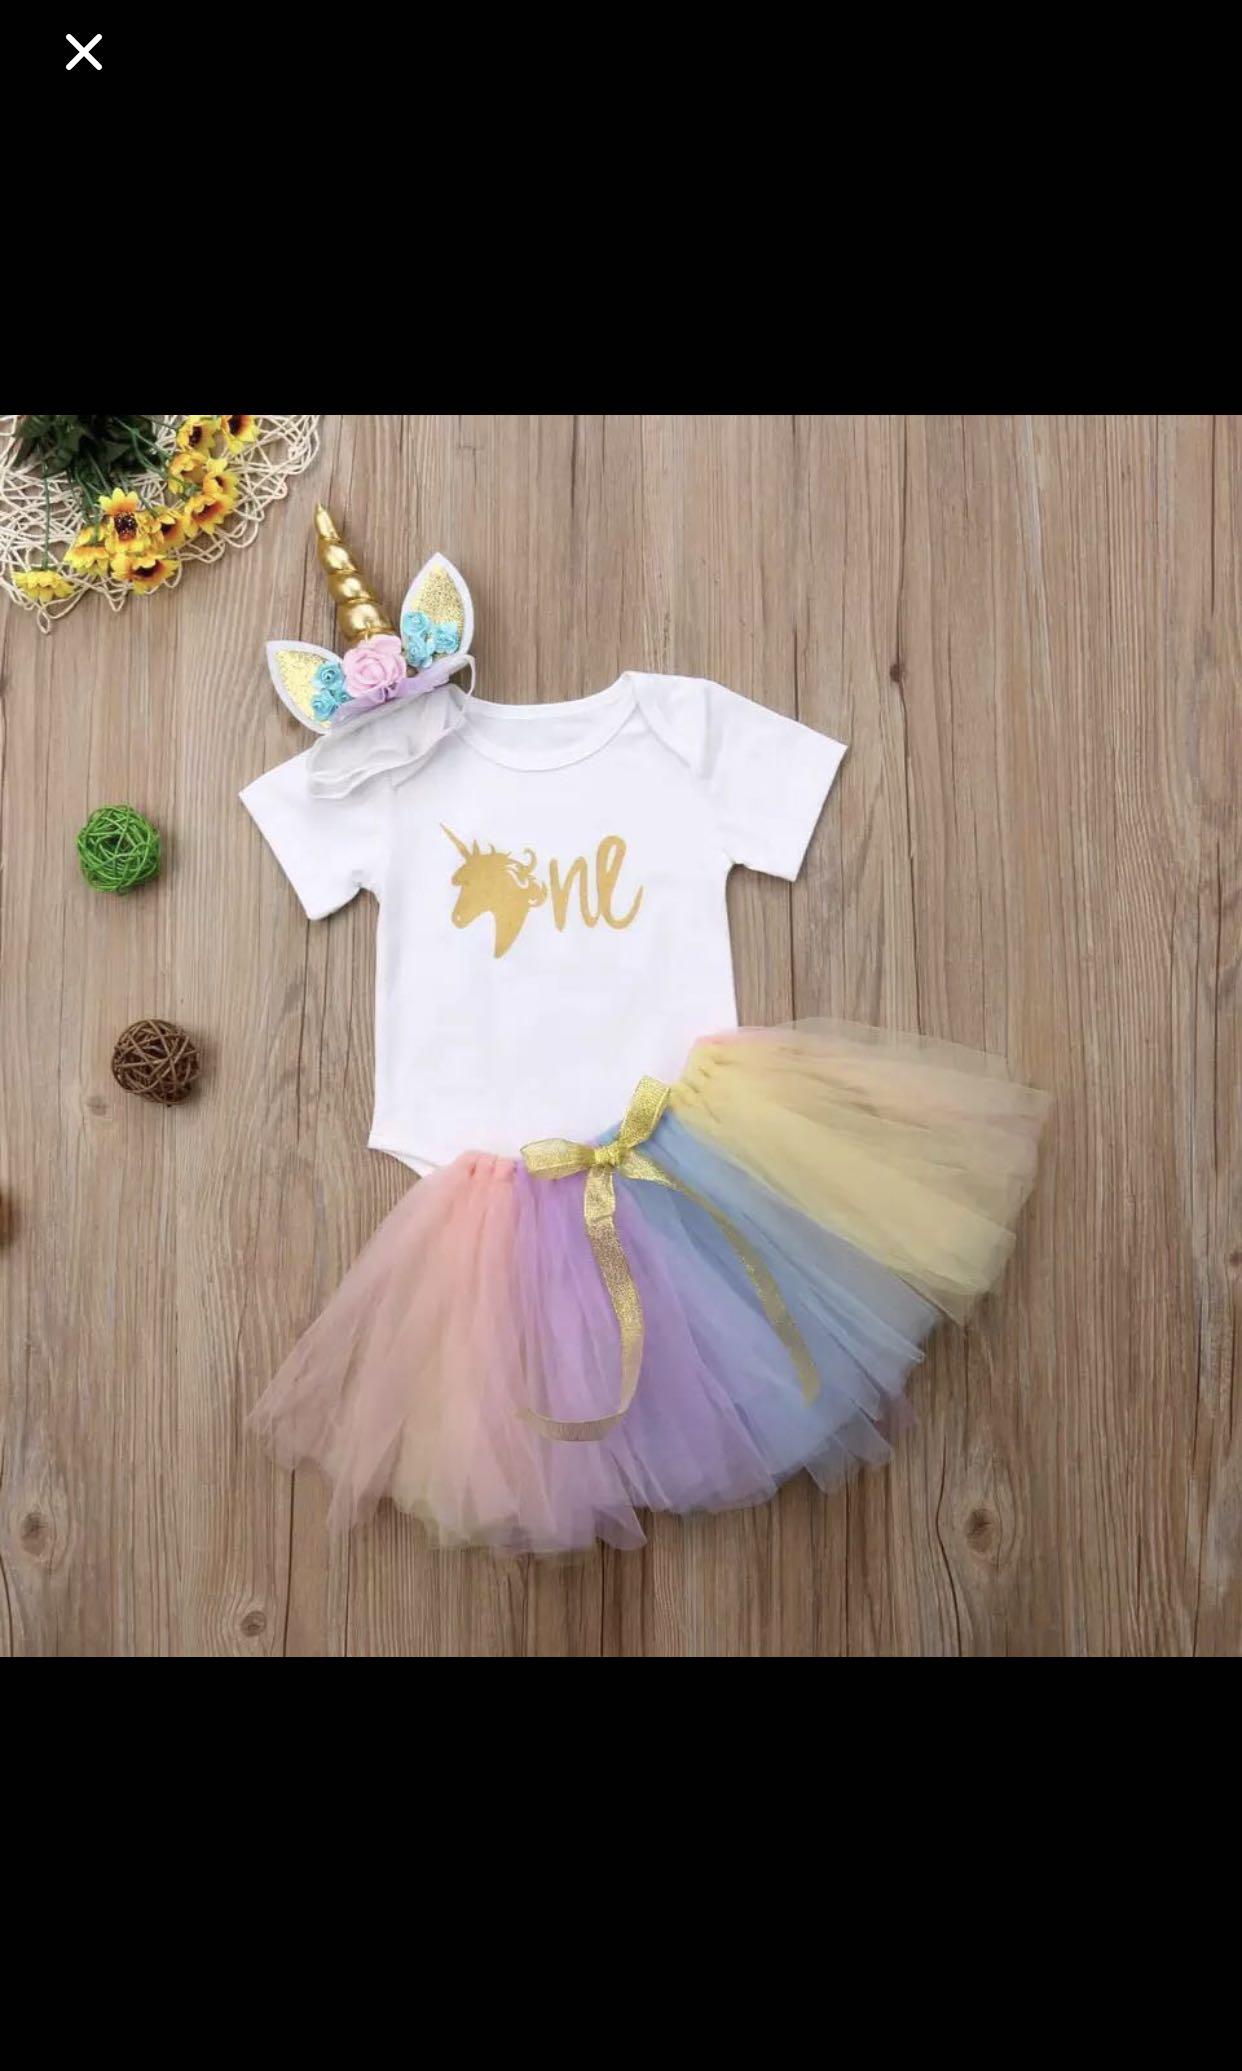 unicorn one year old outfit